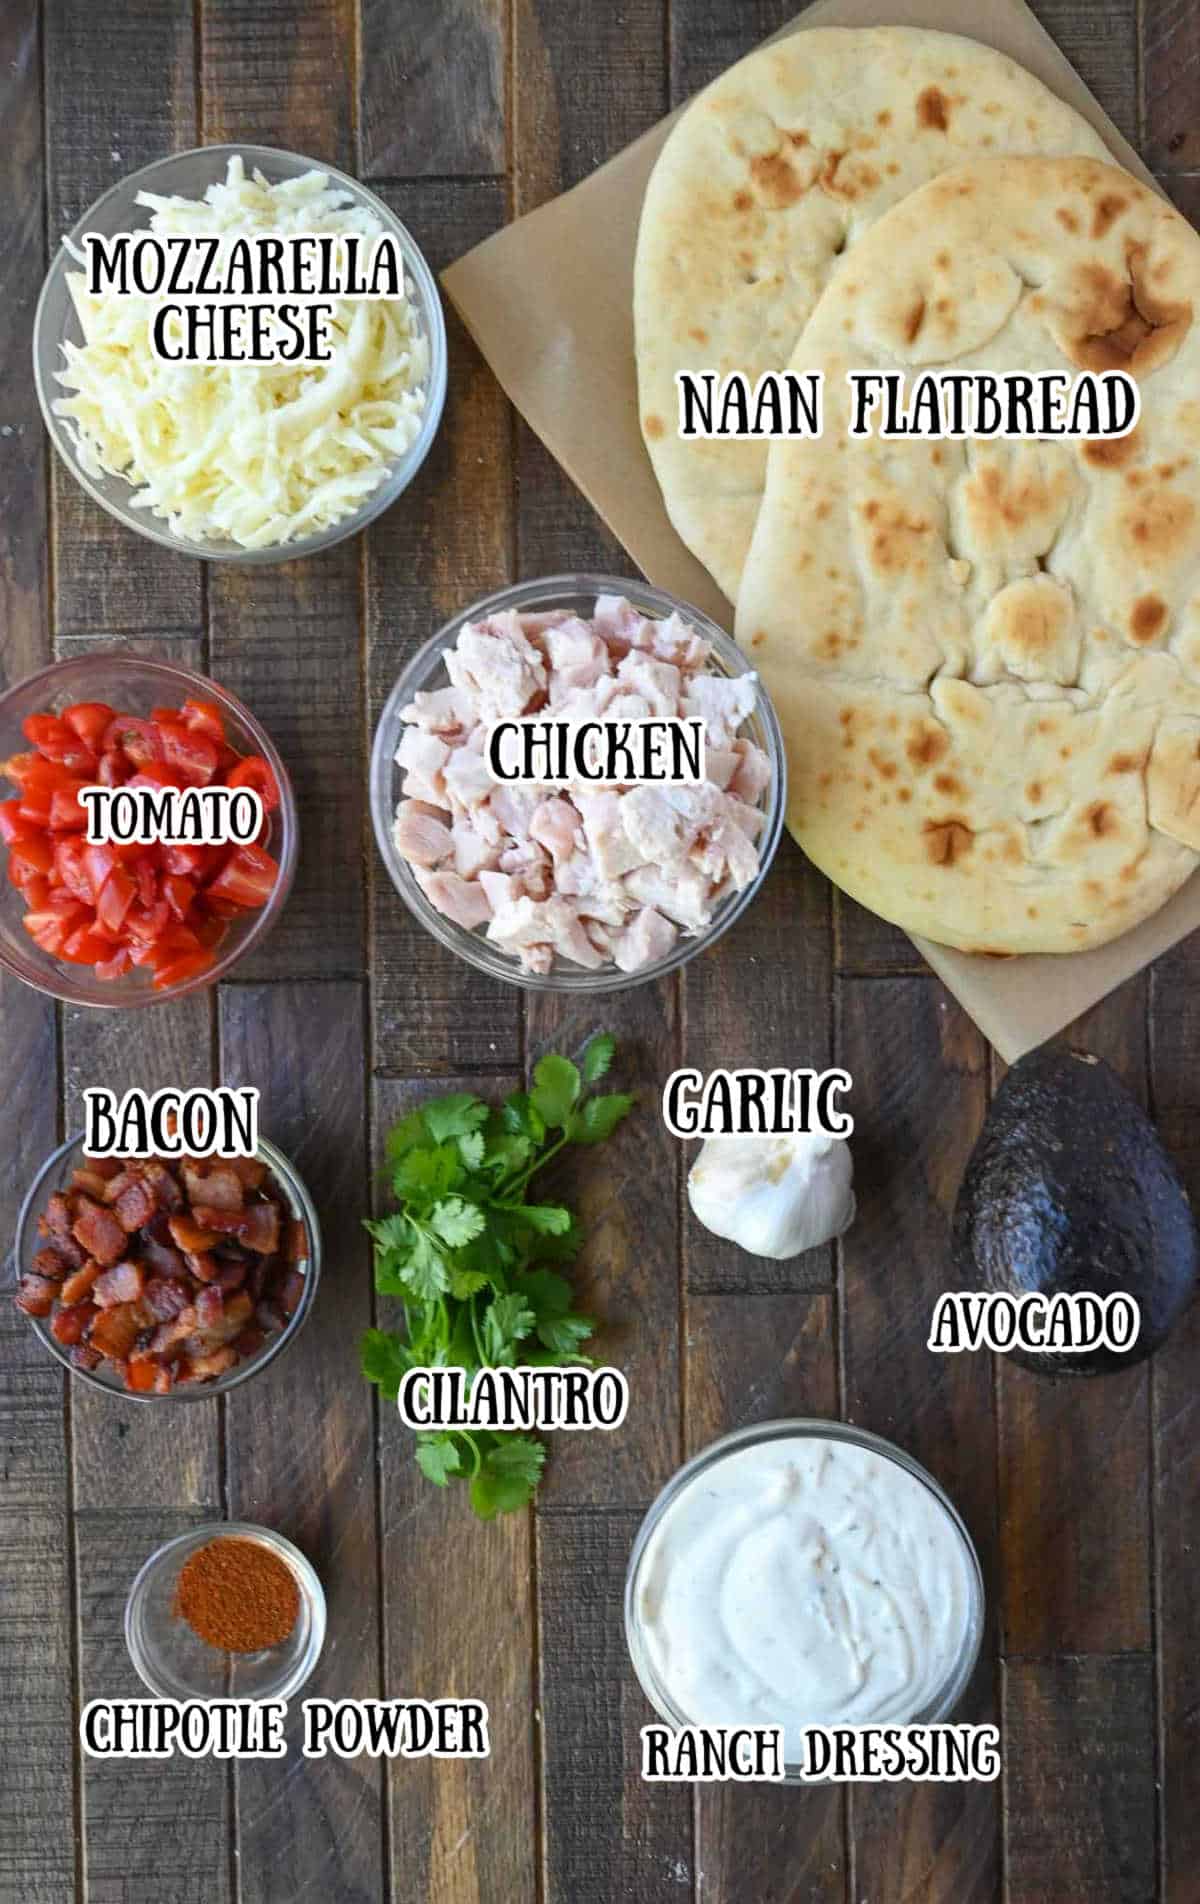 All the ingredients needed for this chicken flatbread.